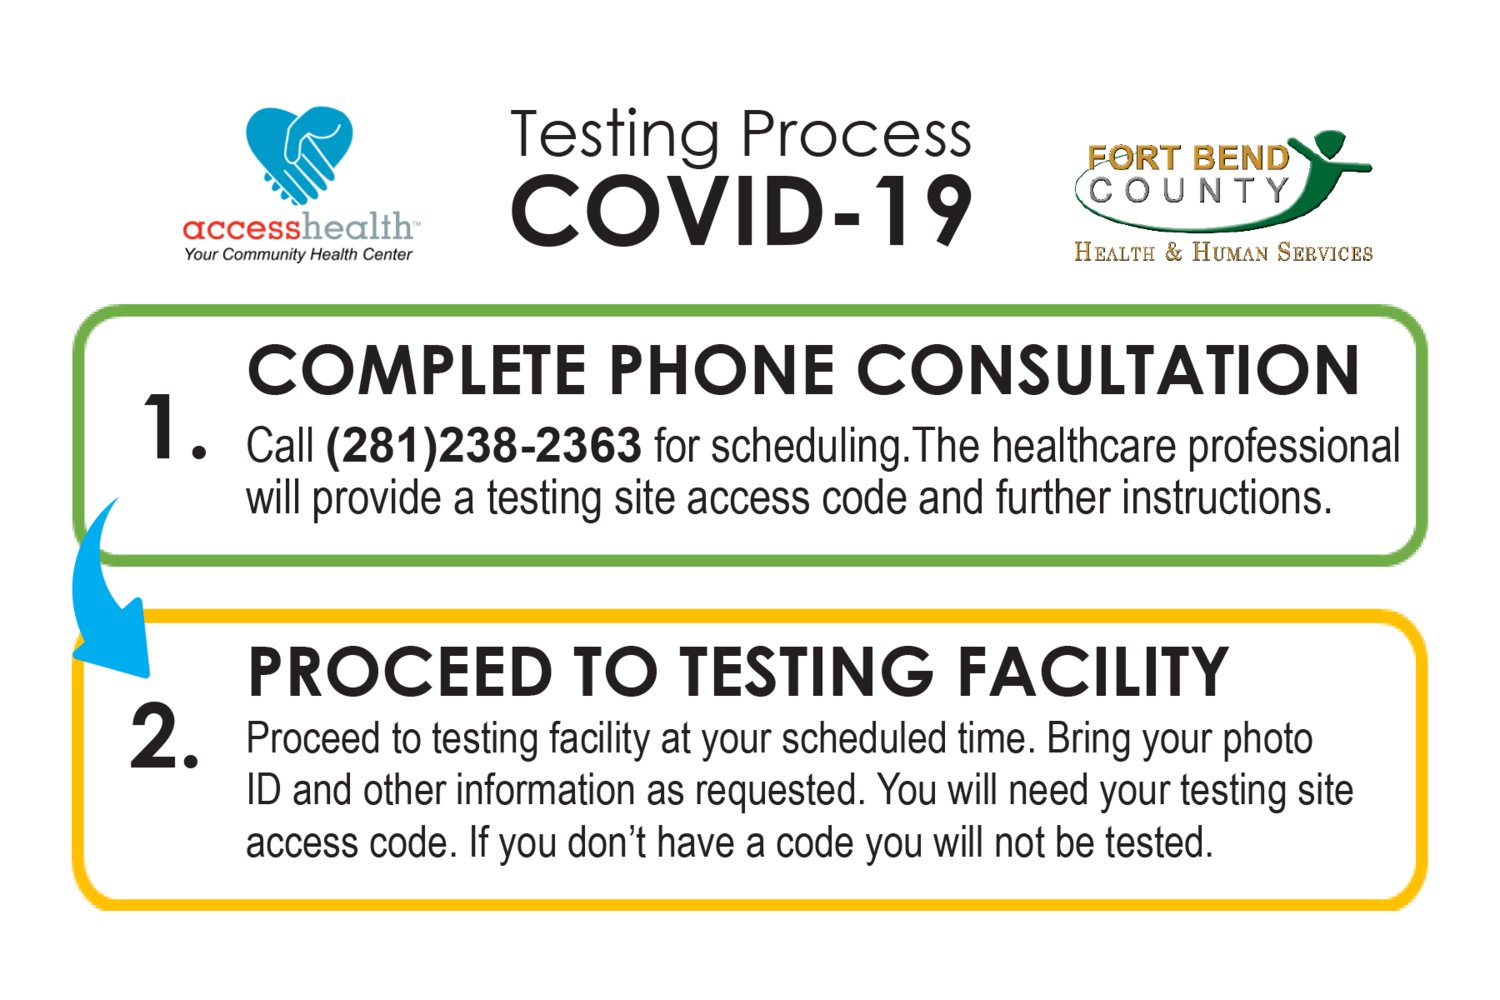 Residents must complete a phone consultation prior to receiving a test at the county's testing facility.